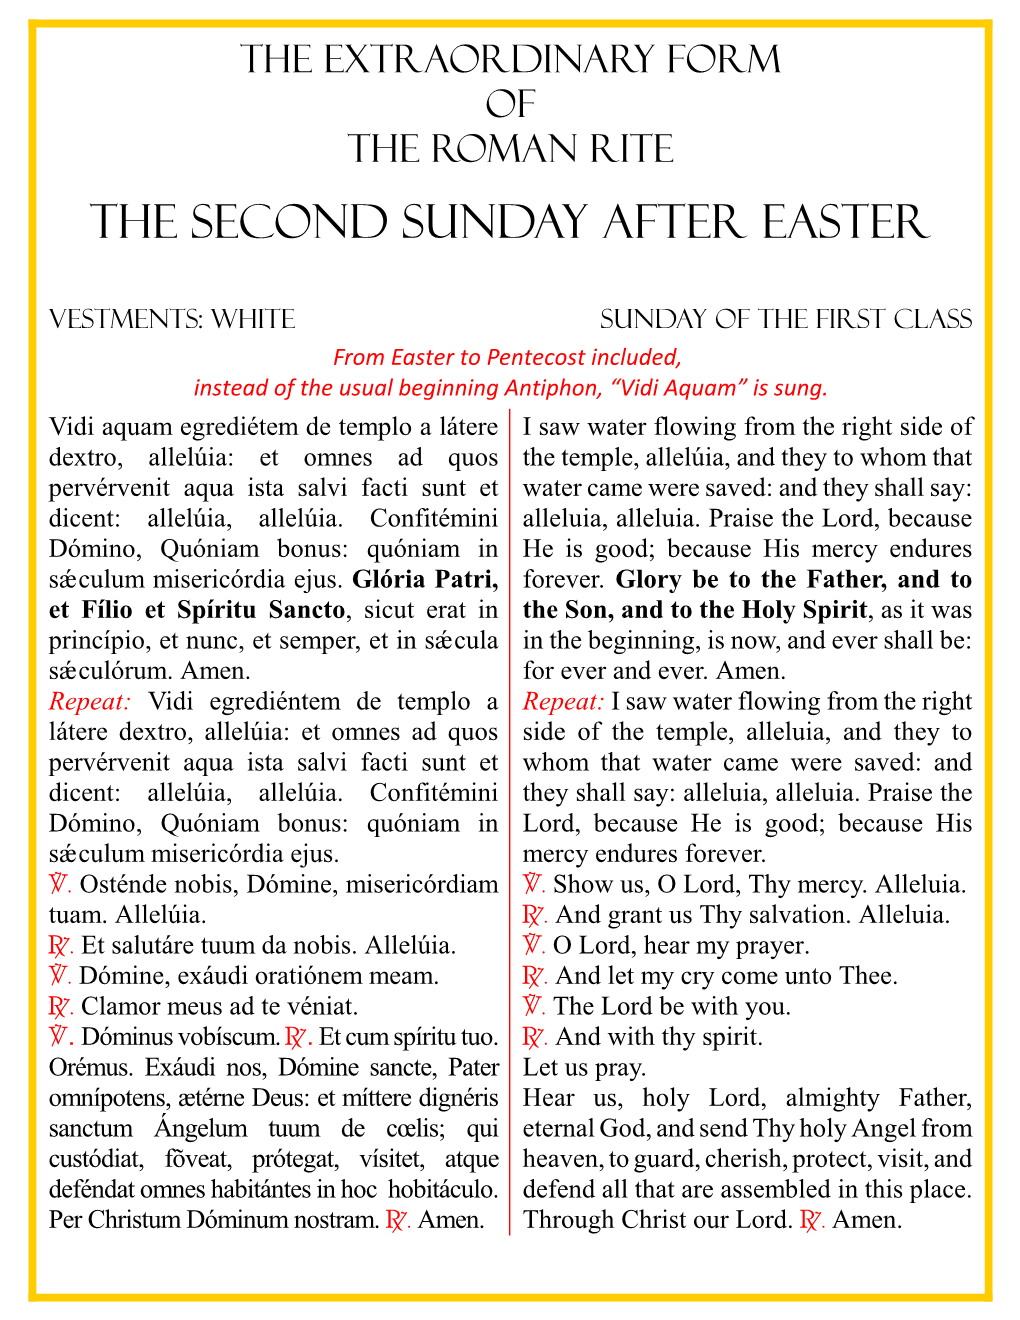 The Second Sunday After Easter